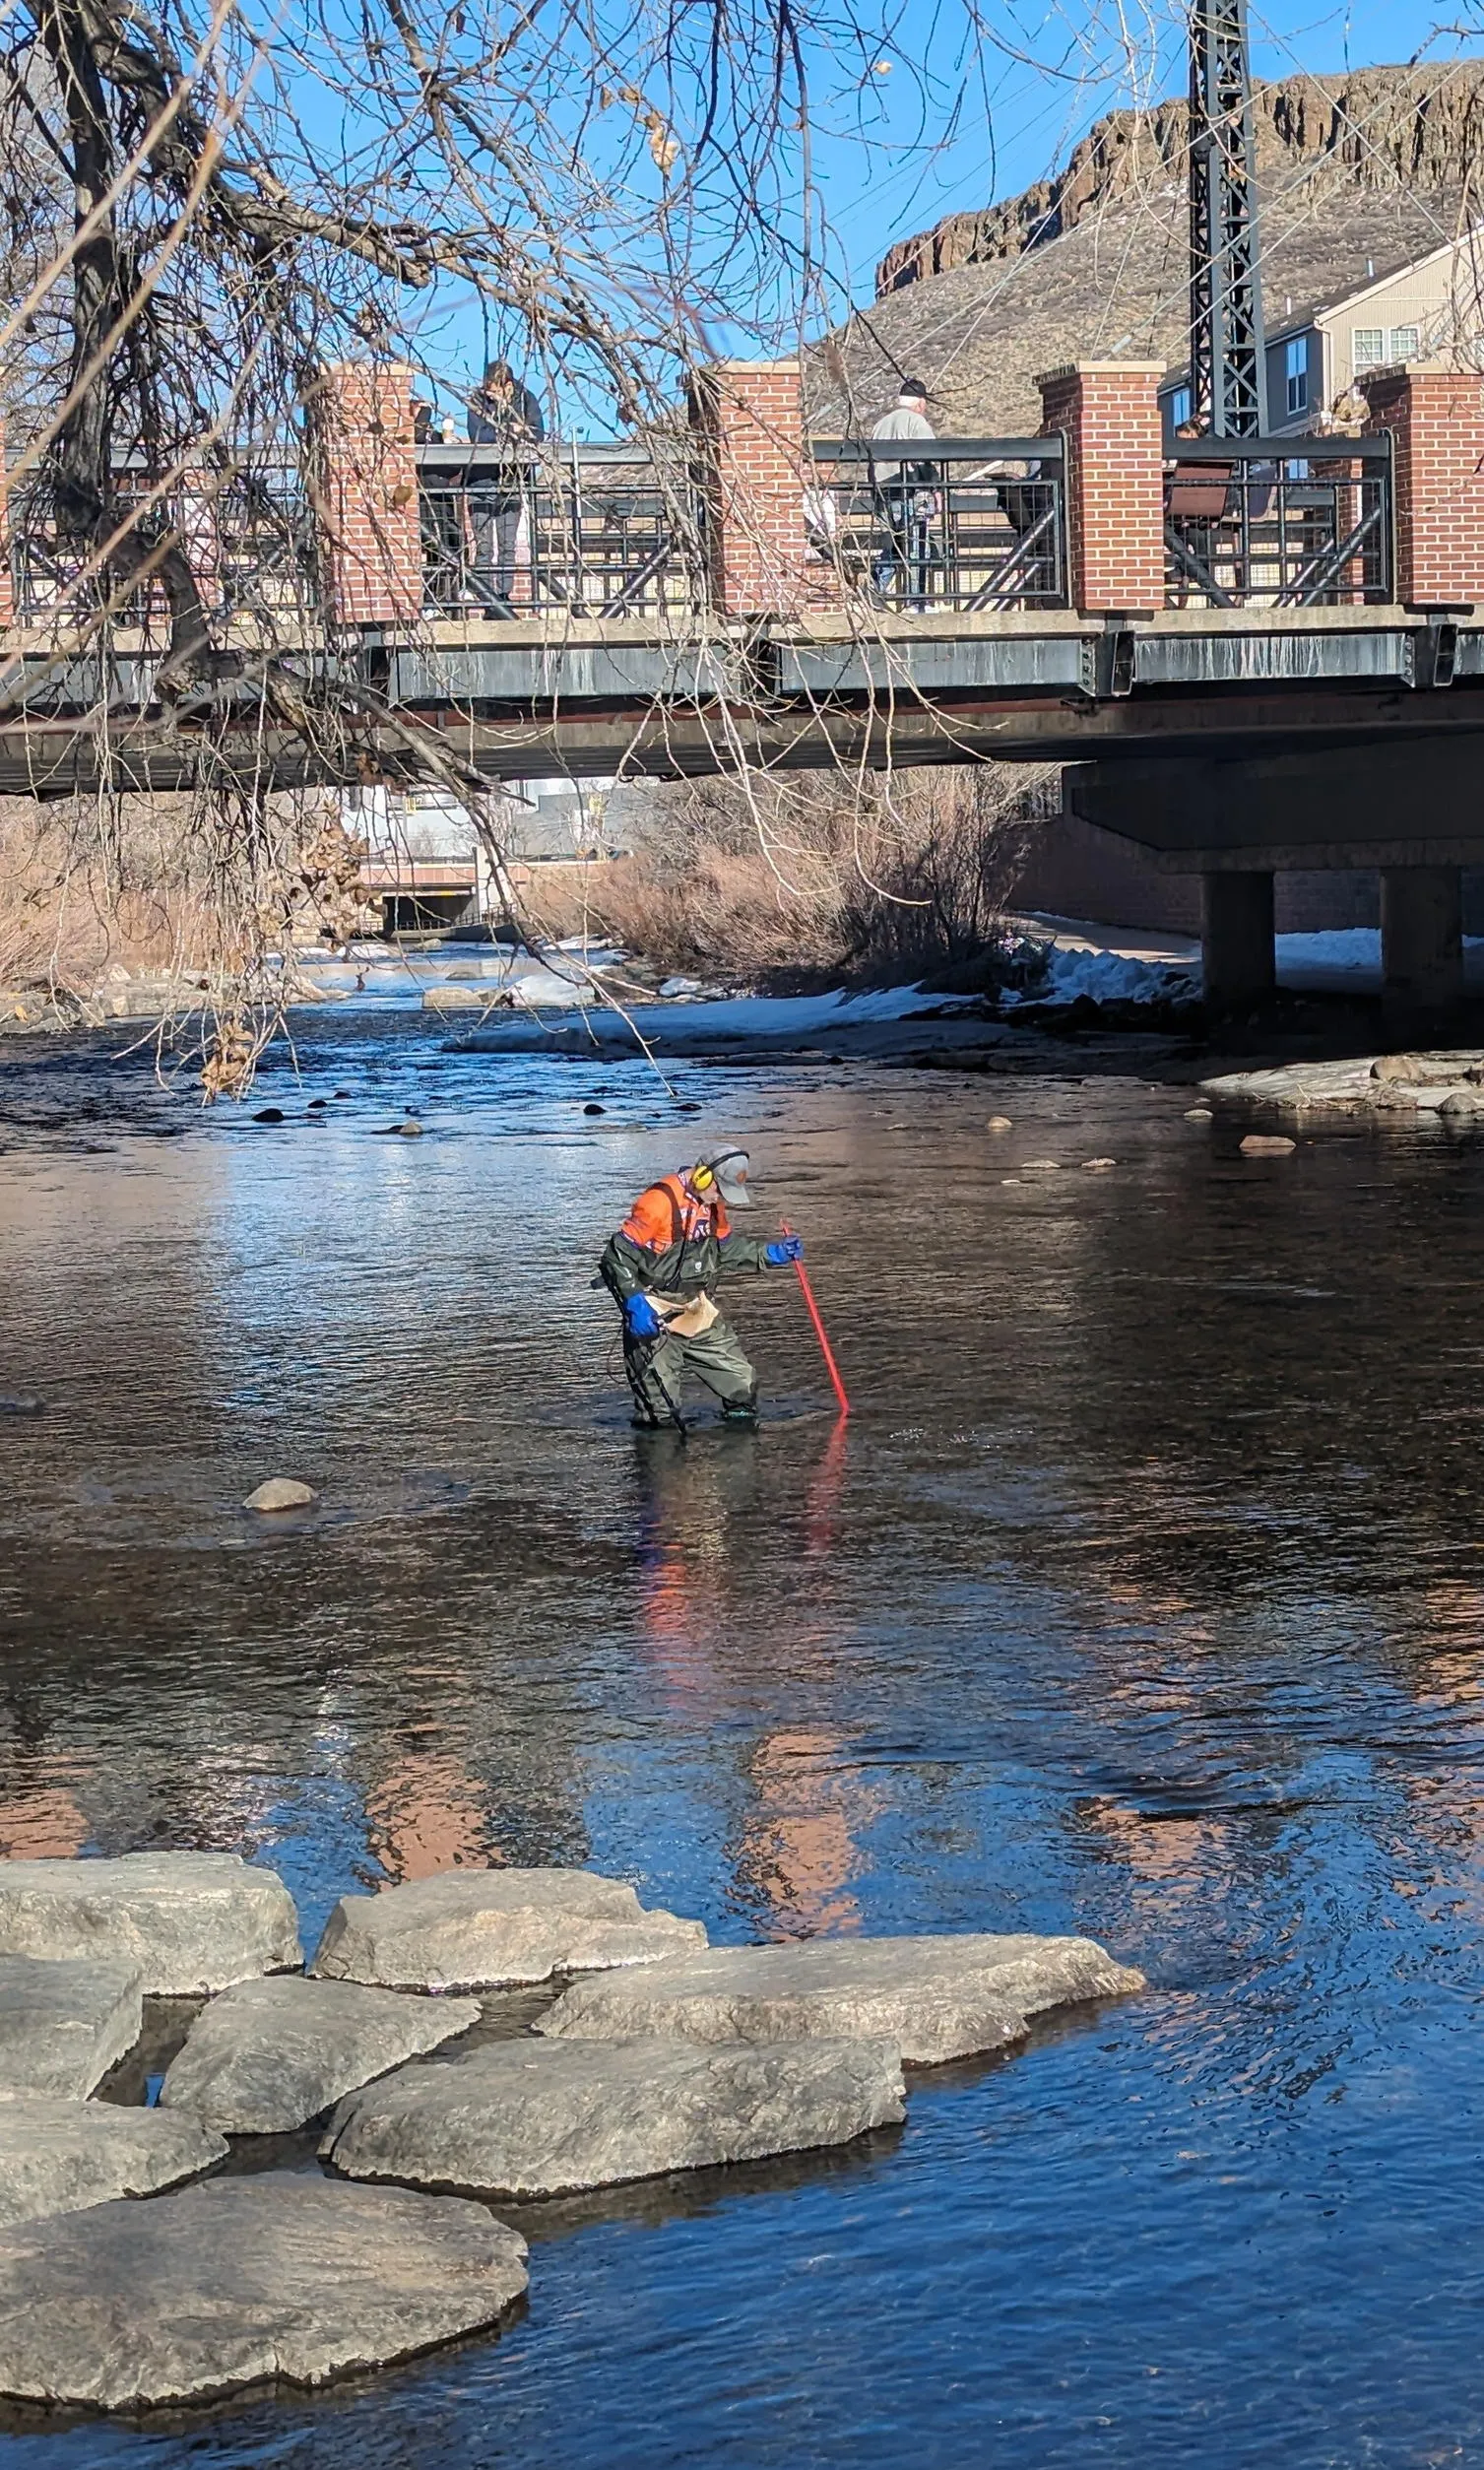 A man stands knee-deep in Clear Creek, using a metal detector to scan the bottom.